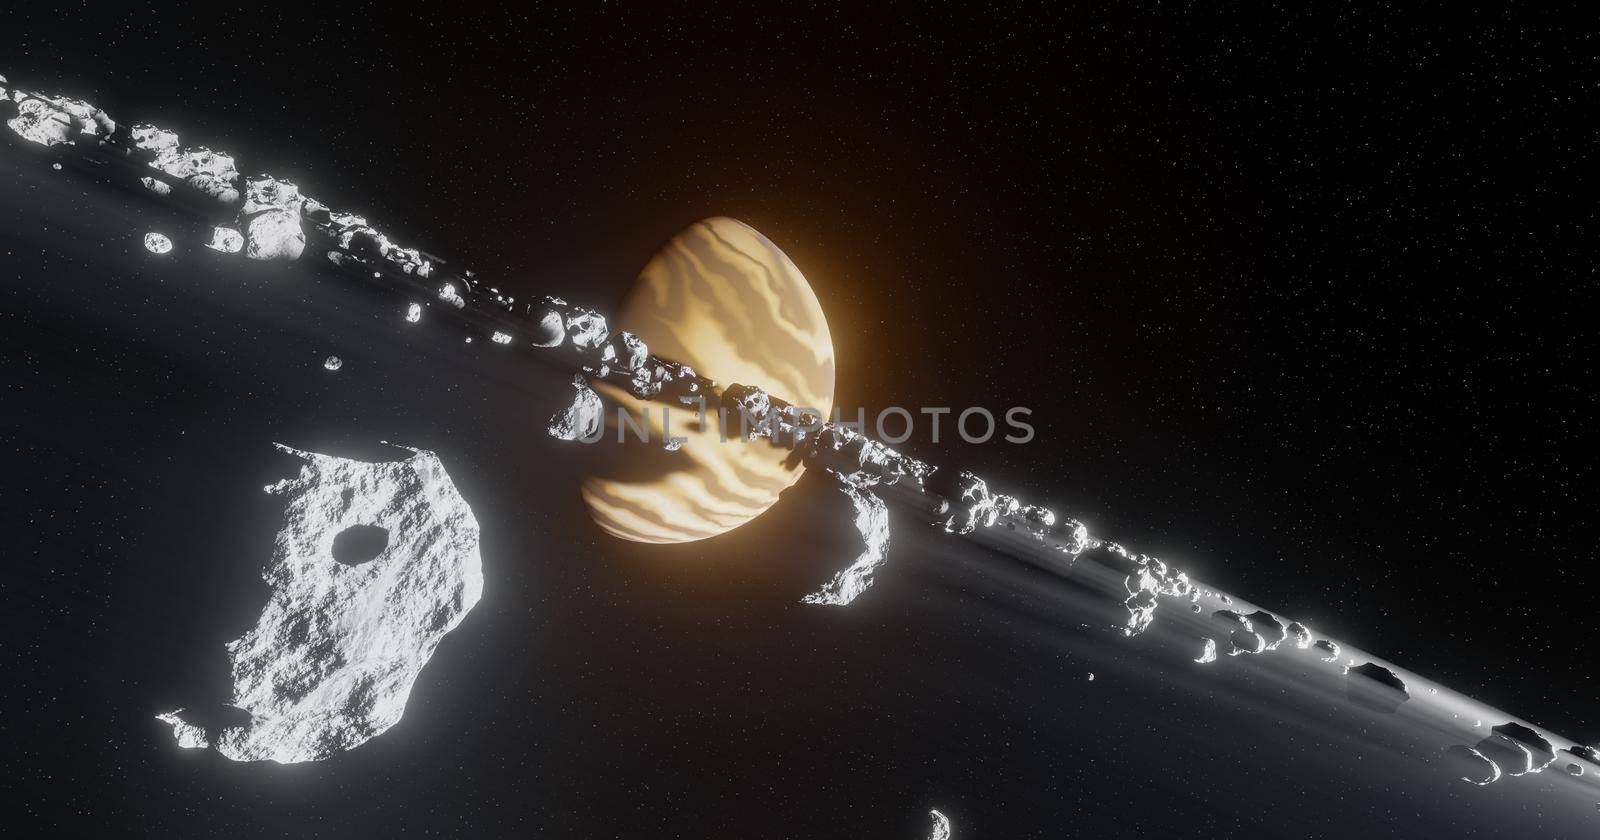 orange planet with asteroid ring by asolano